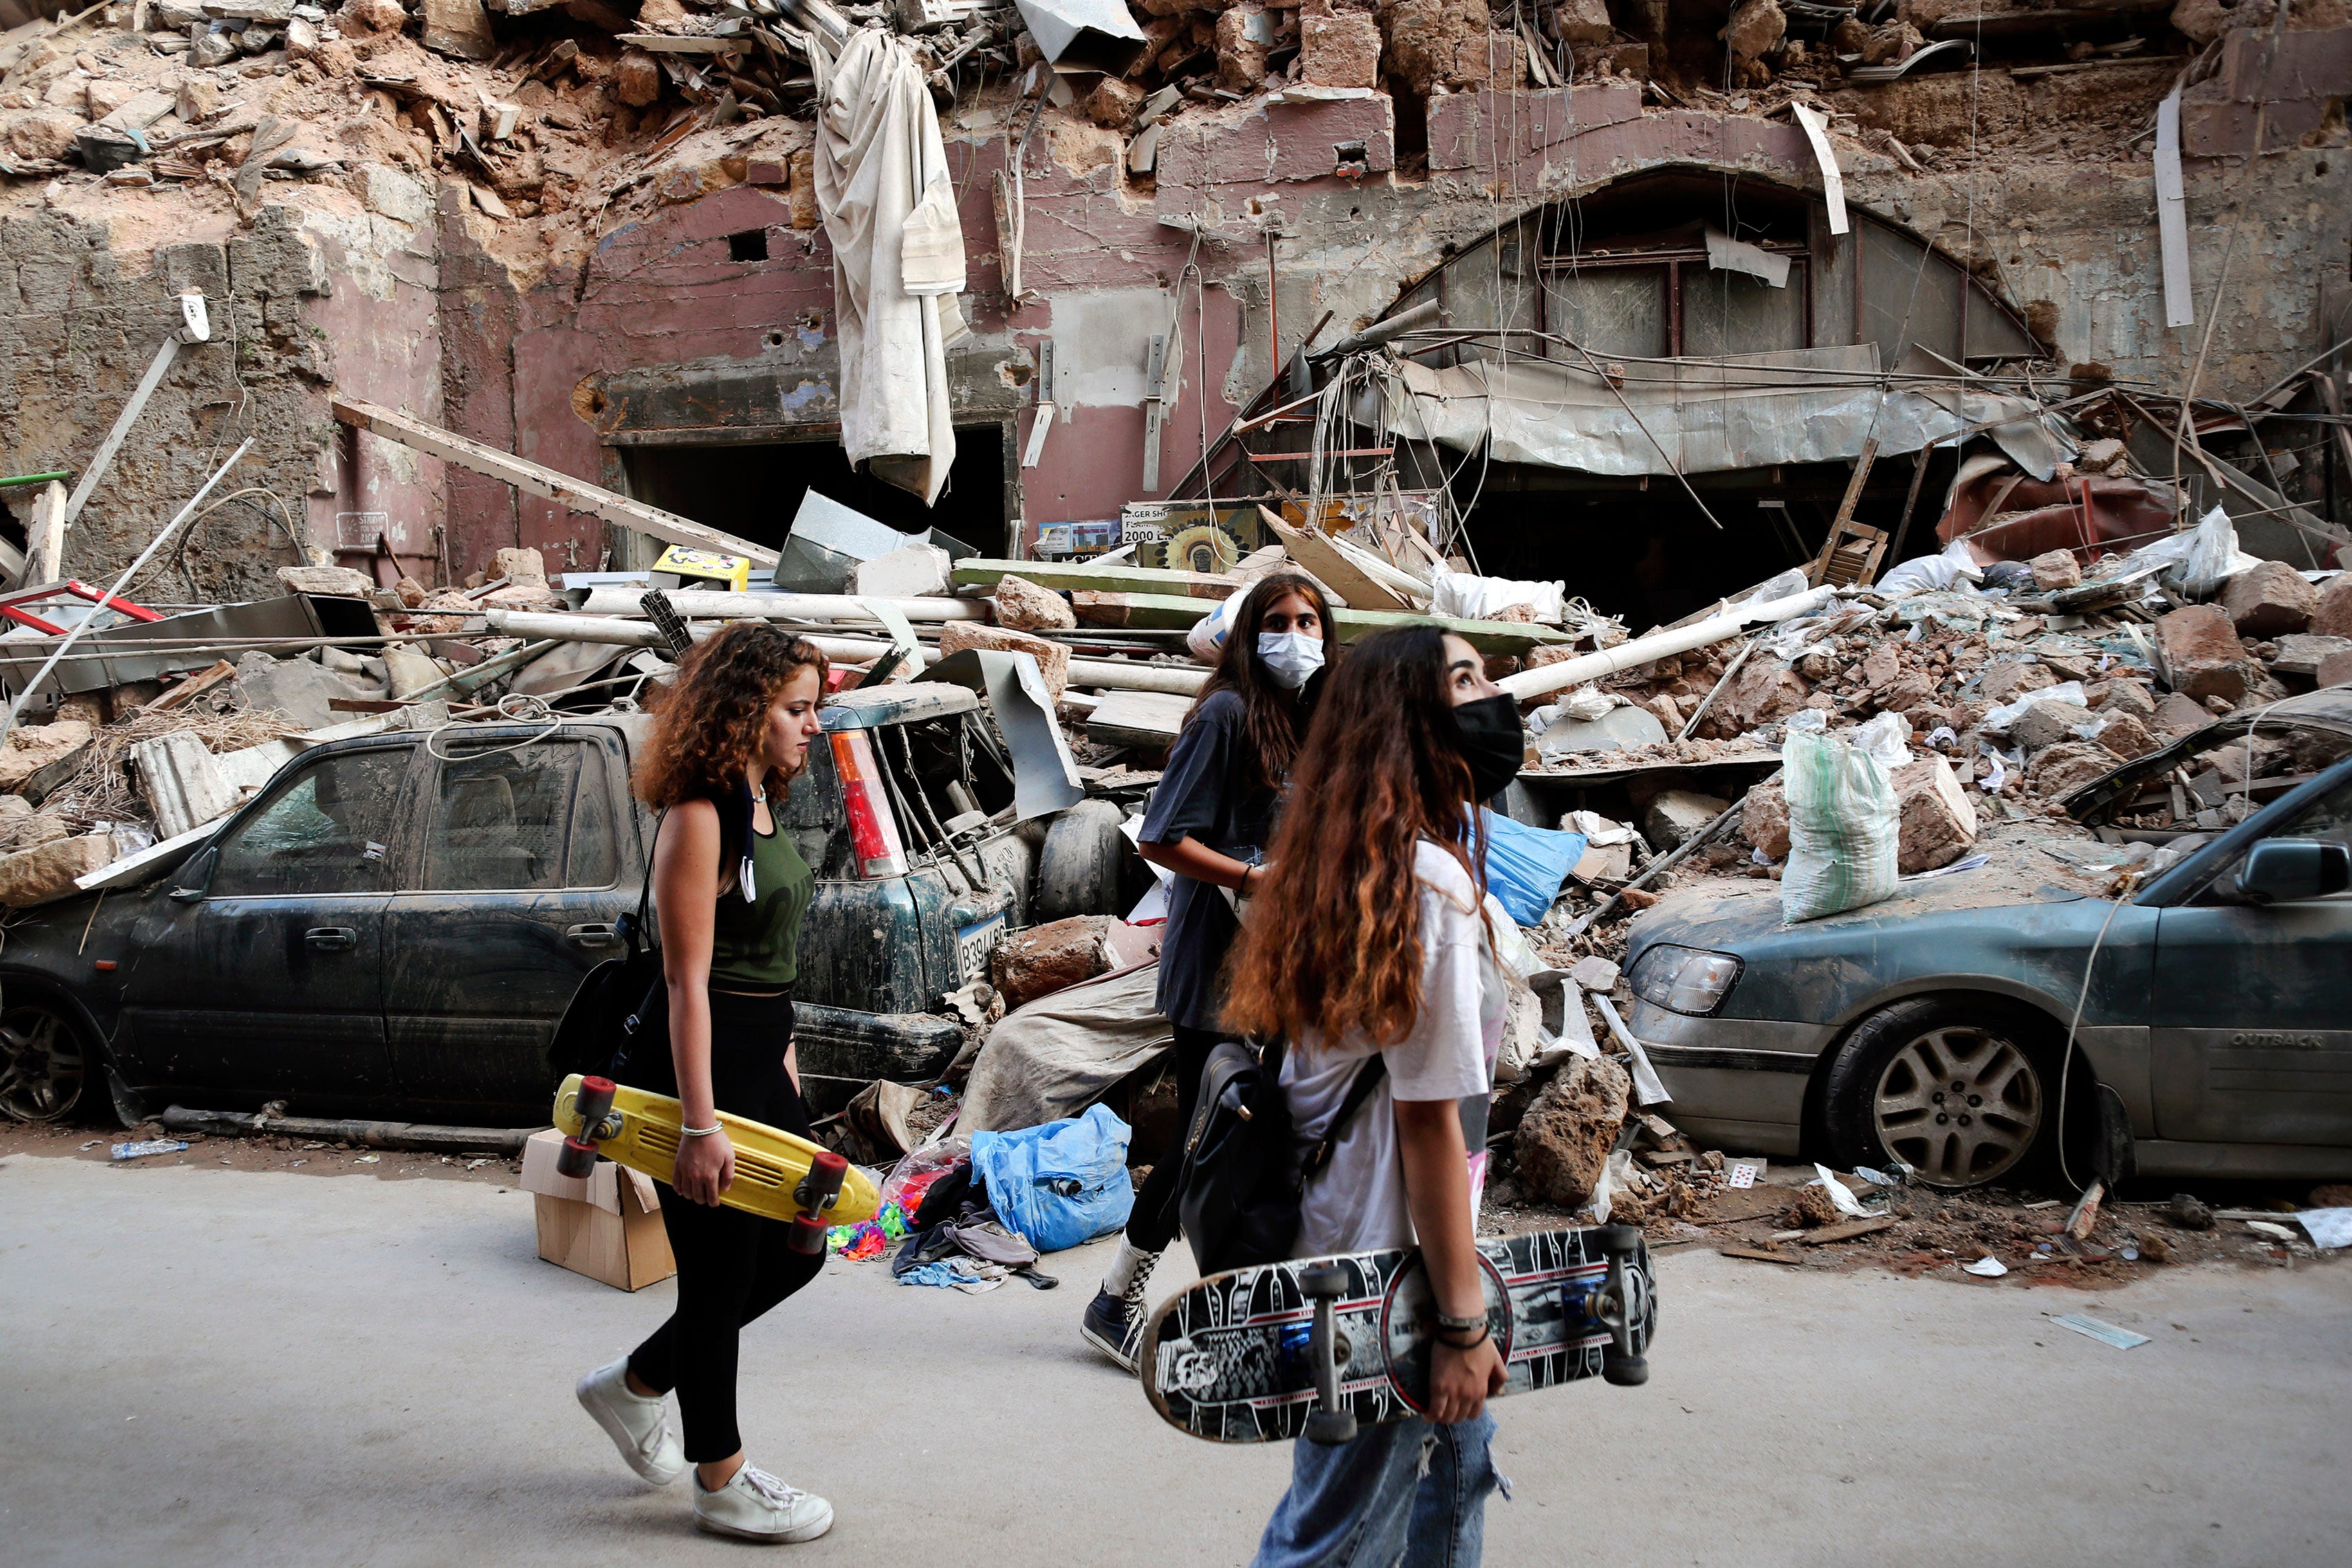 Women walk past destroyed cars at a neighborhood near the scene of Tuesday's explosion that hit the seaport of Beirut, Lebanon, Friday, Aug. 7, 2020. Rescue teams were still searching the rubble of Beirut's port for bodies on Friday, nearly three days after a massive explosion sent a wave of destruction through Lebanon's capital.